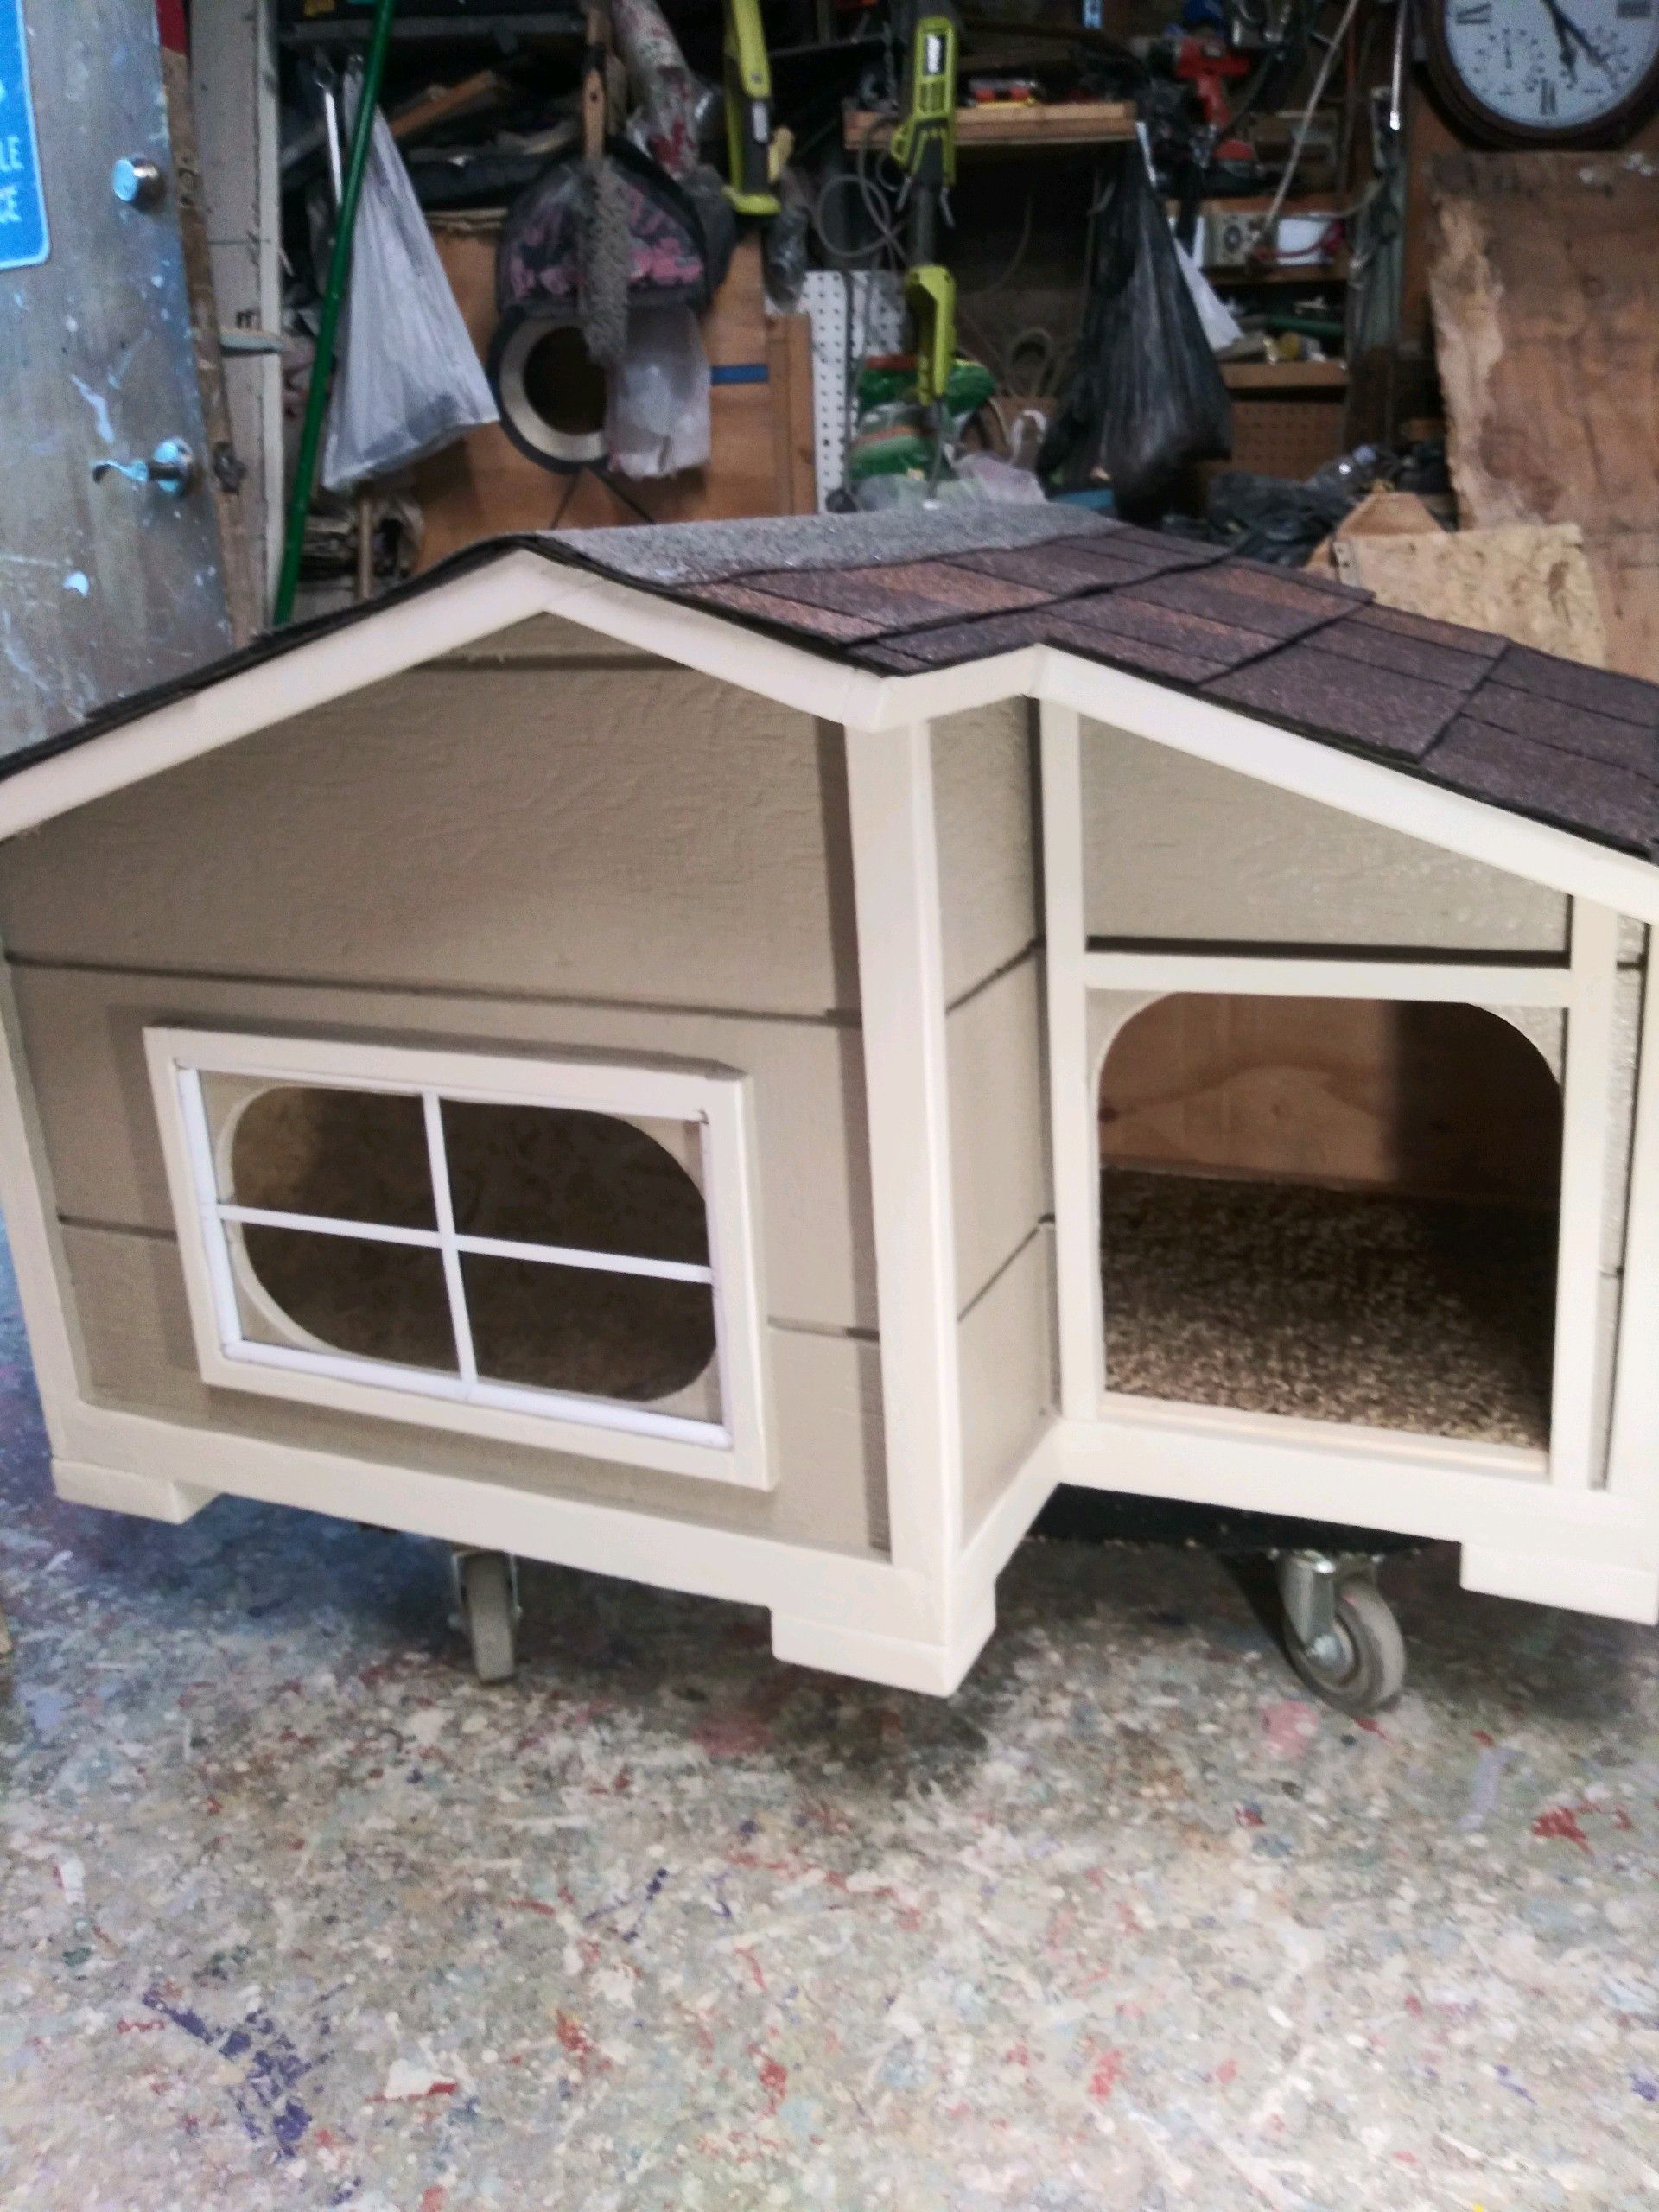 custom New dog house medium -small nice and wide can fit three small dogs$150 firm must wear mask